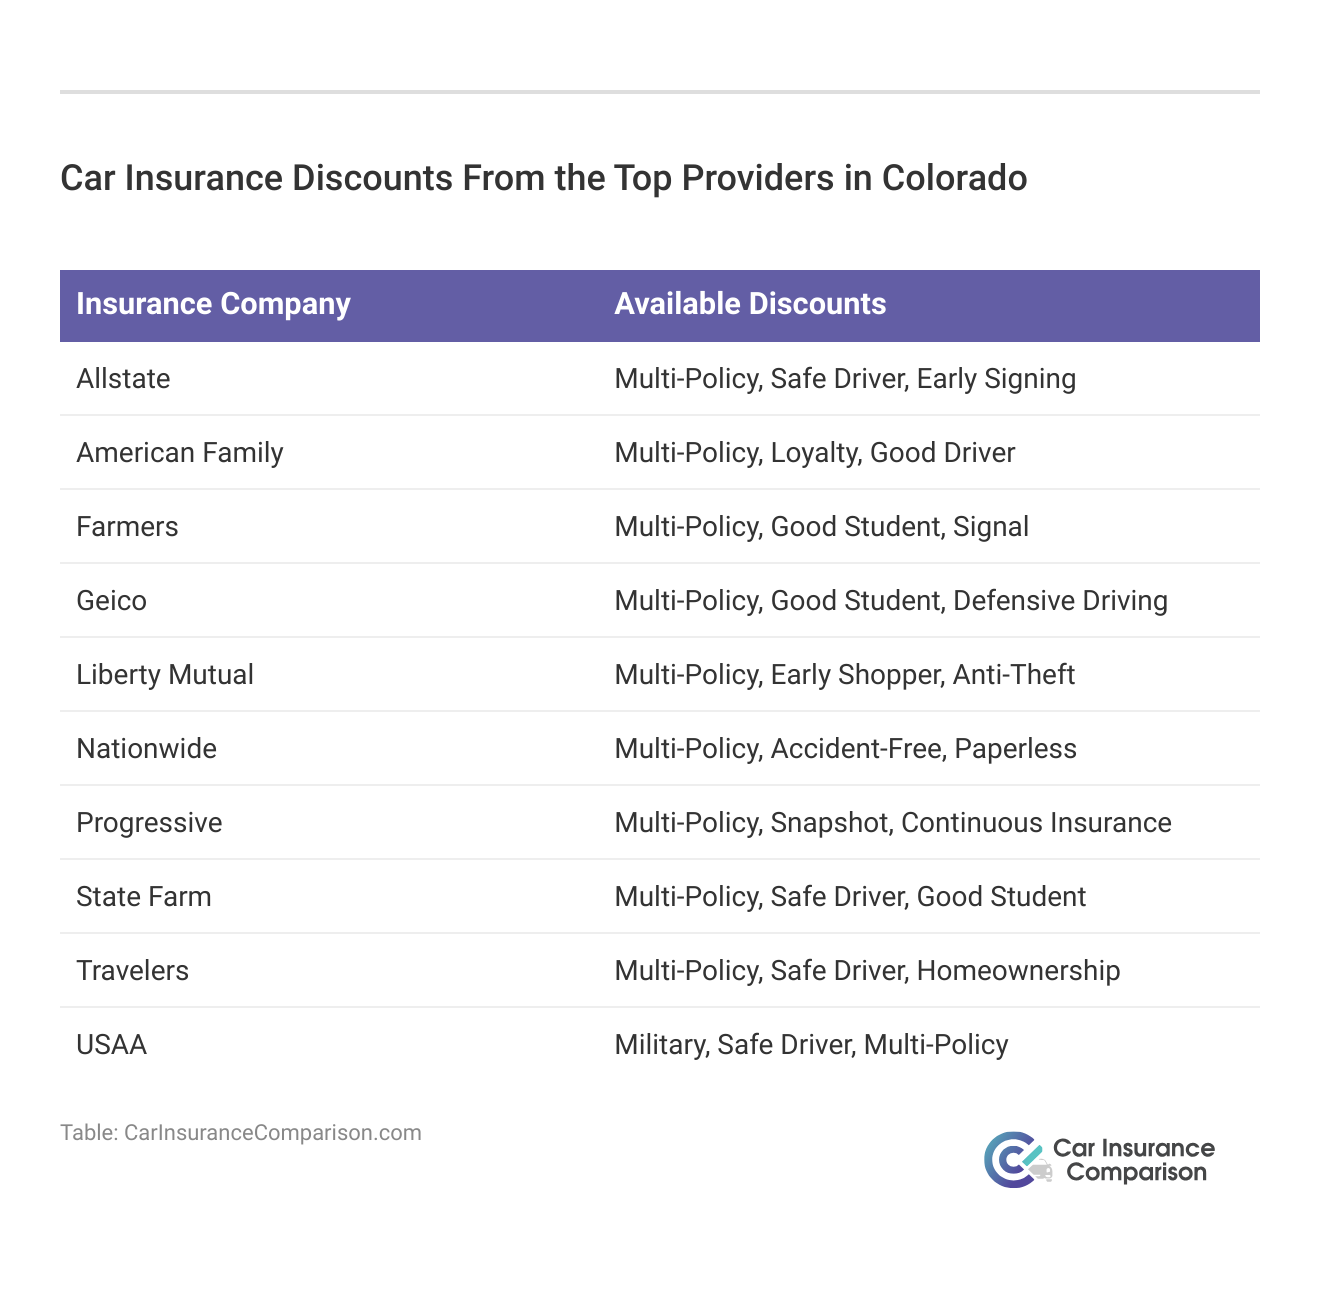 <h3>Car Insurance Discounts From the Top Providers in Colorado</h3>